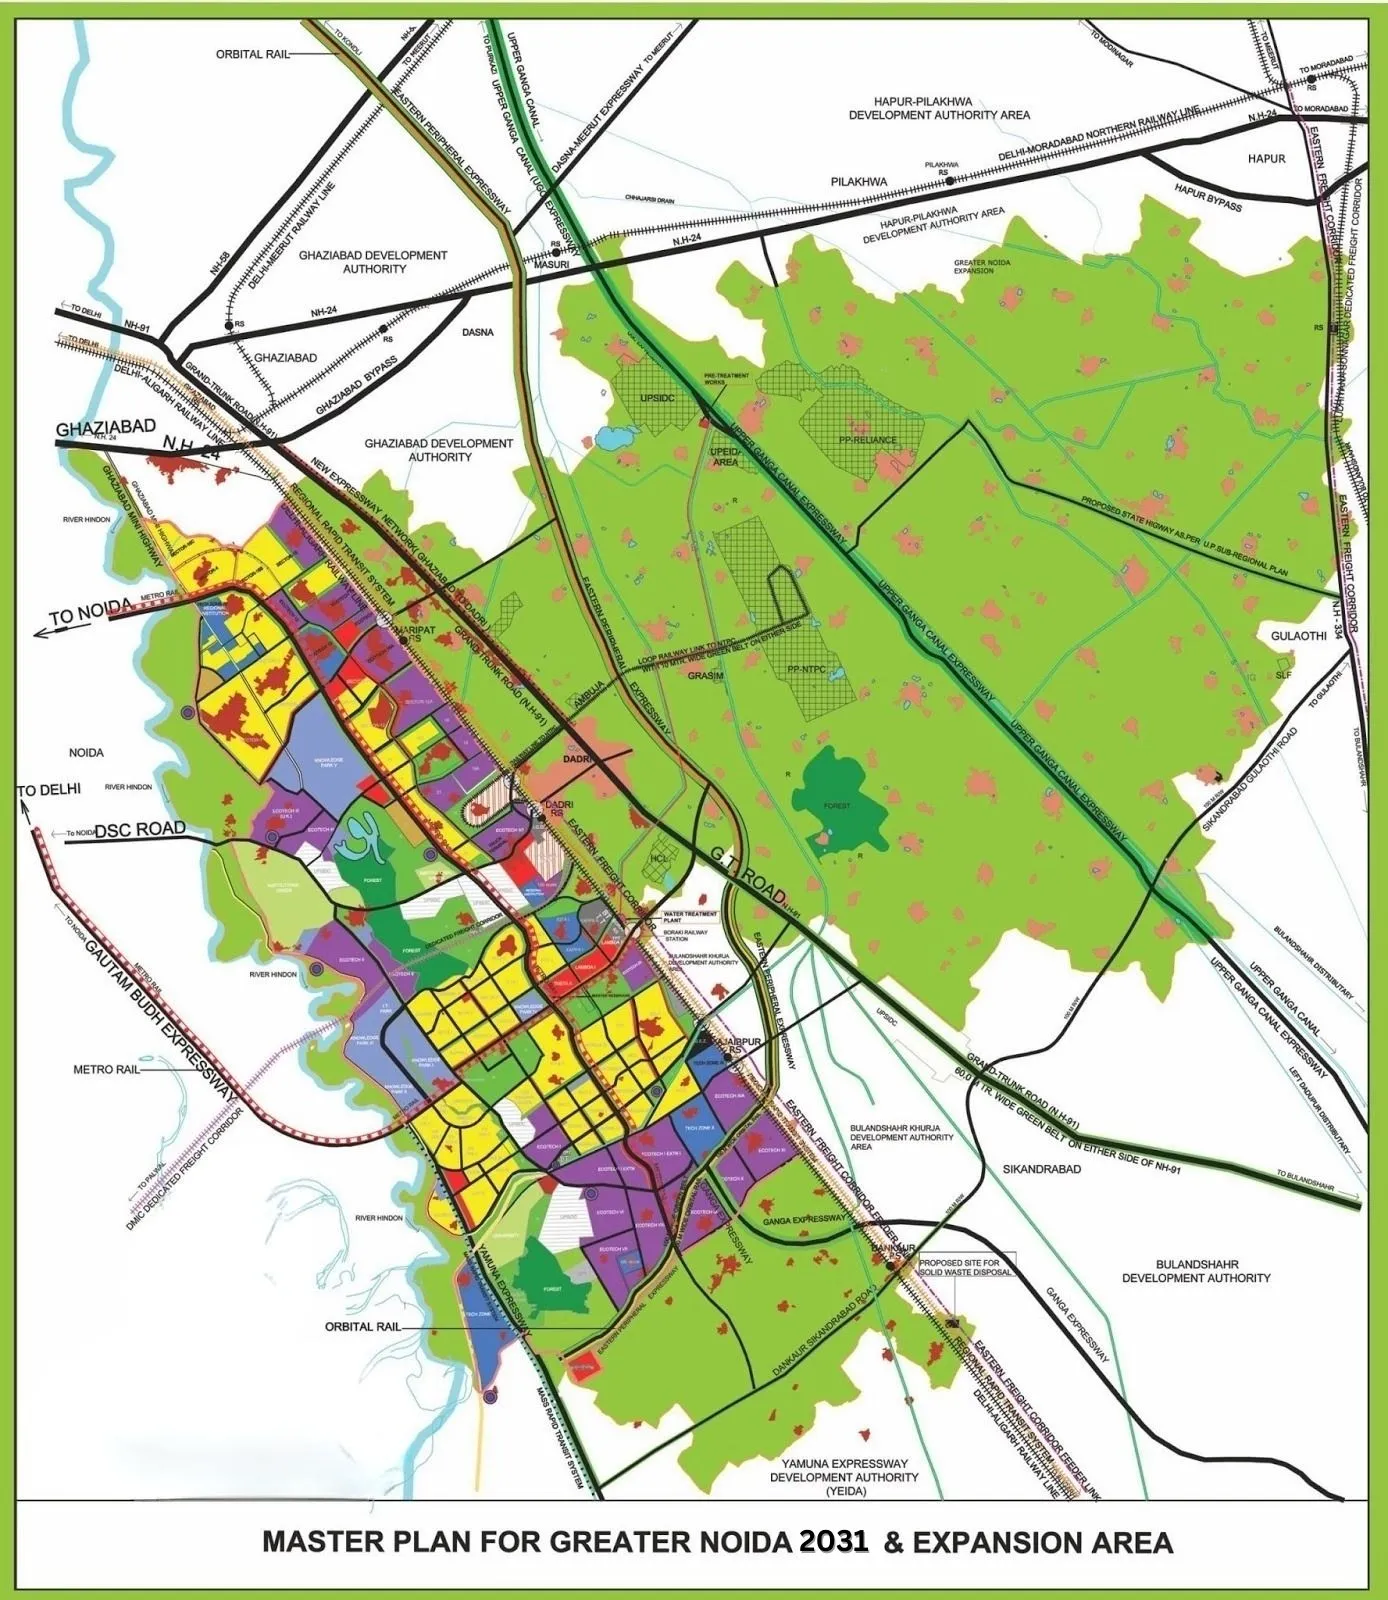 The primary goal of the master plan 2031 in greater noida is to create a livable city that meets the needs of its residents and attracts investment and economic growth.